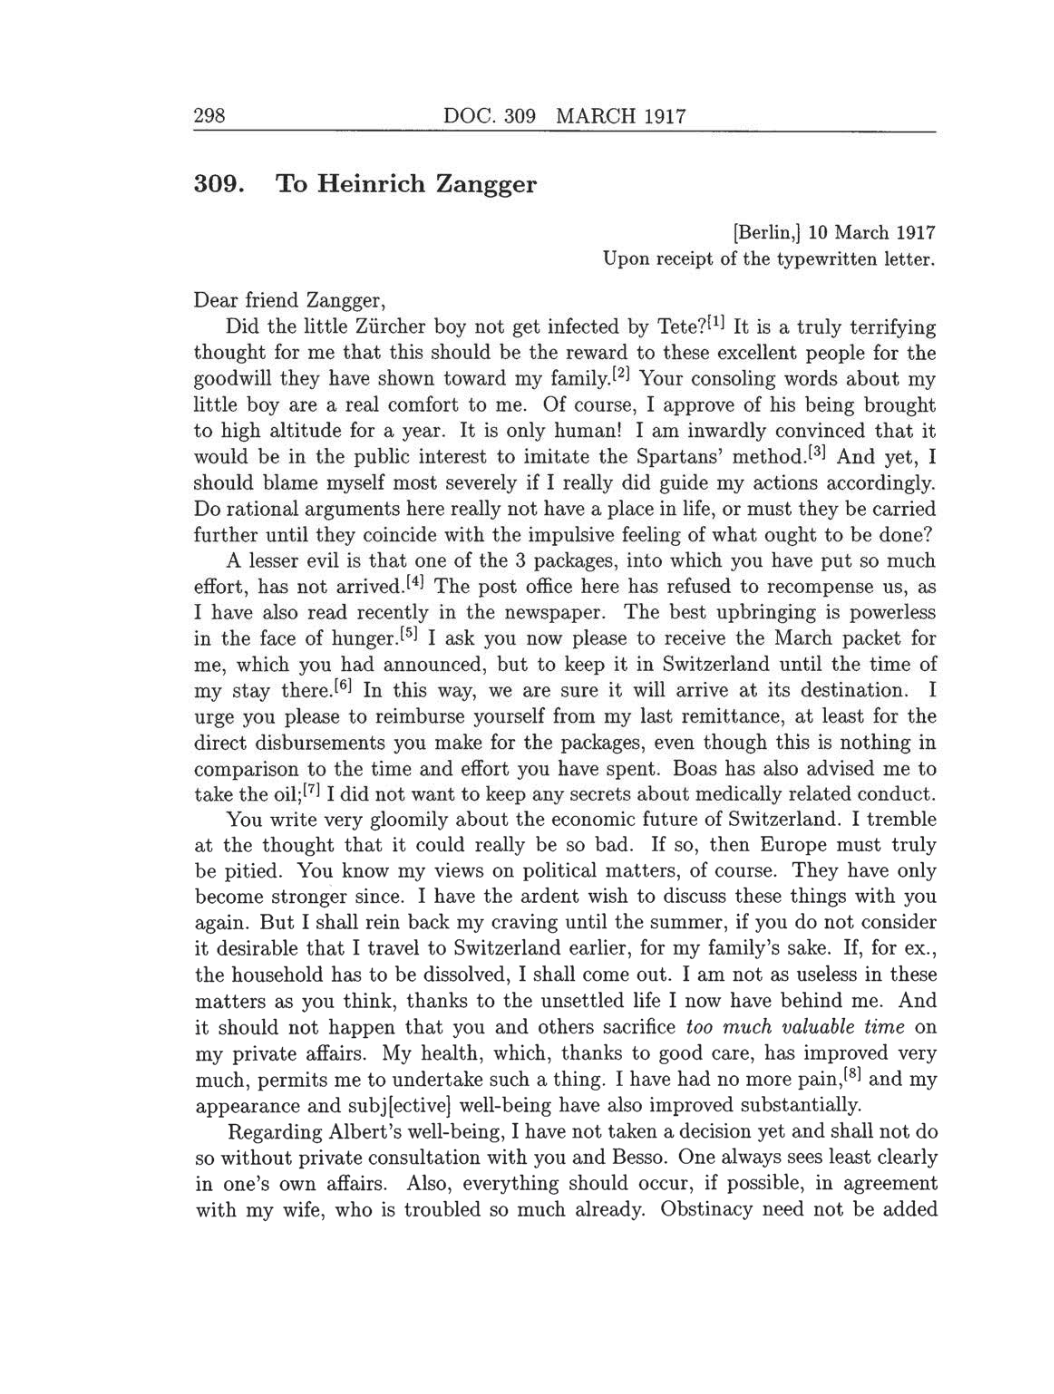 Volume 8: The Berlin Years: Correspondence, 1914-1918 (English translation supplement) page 298